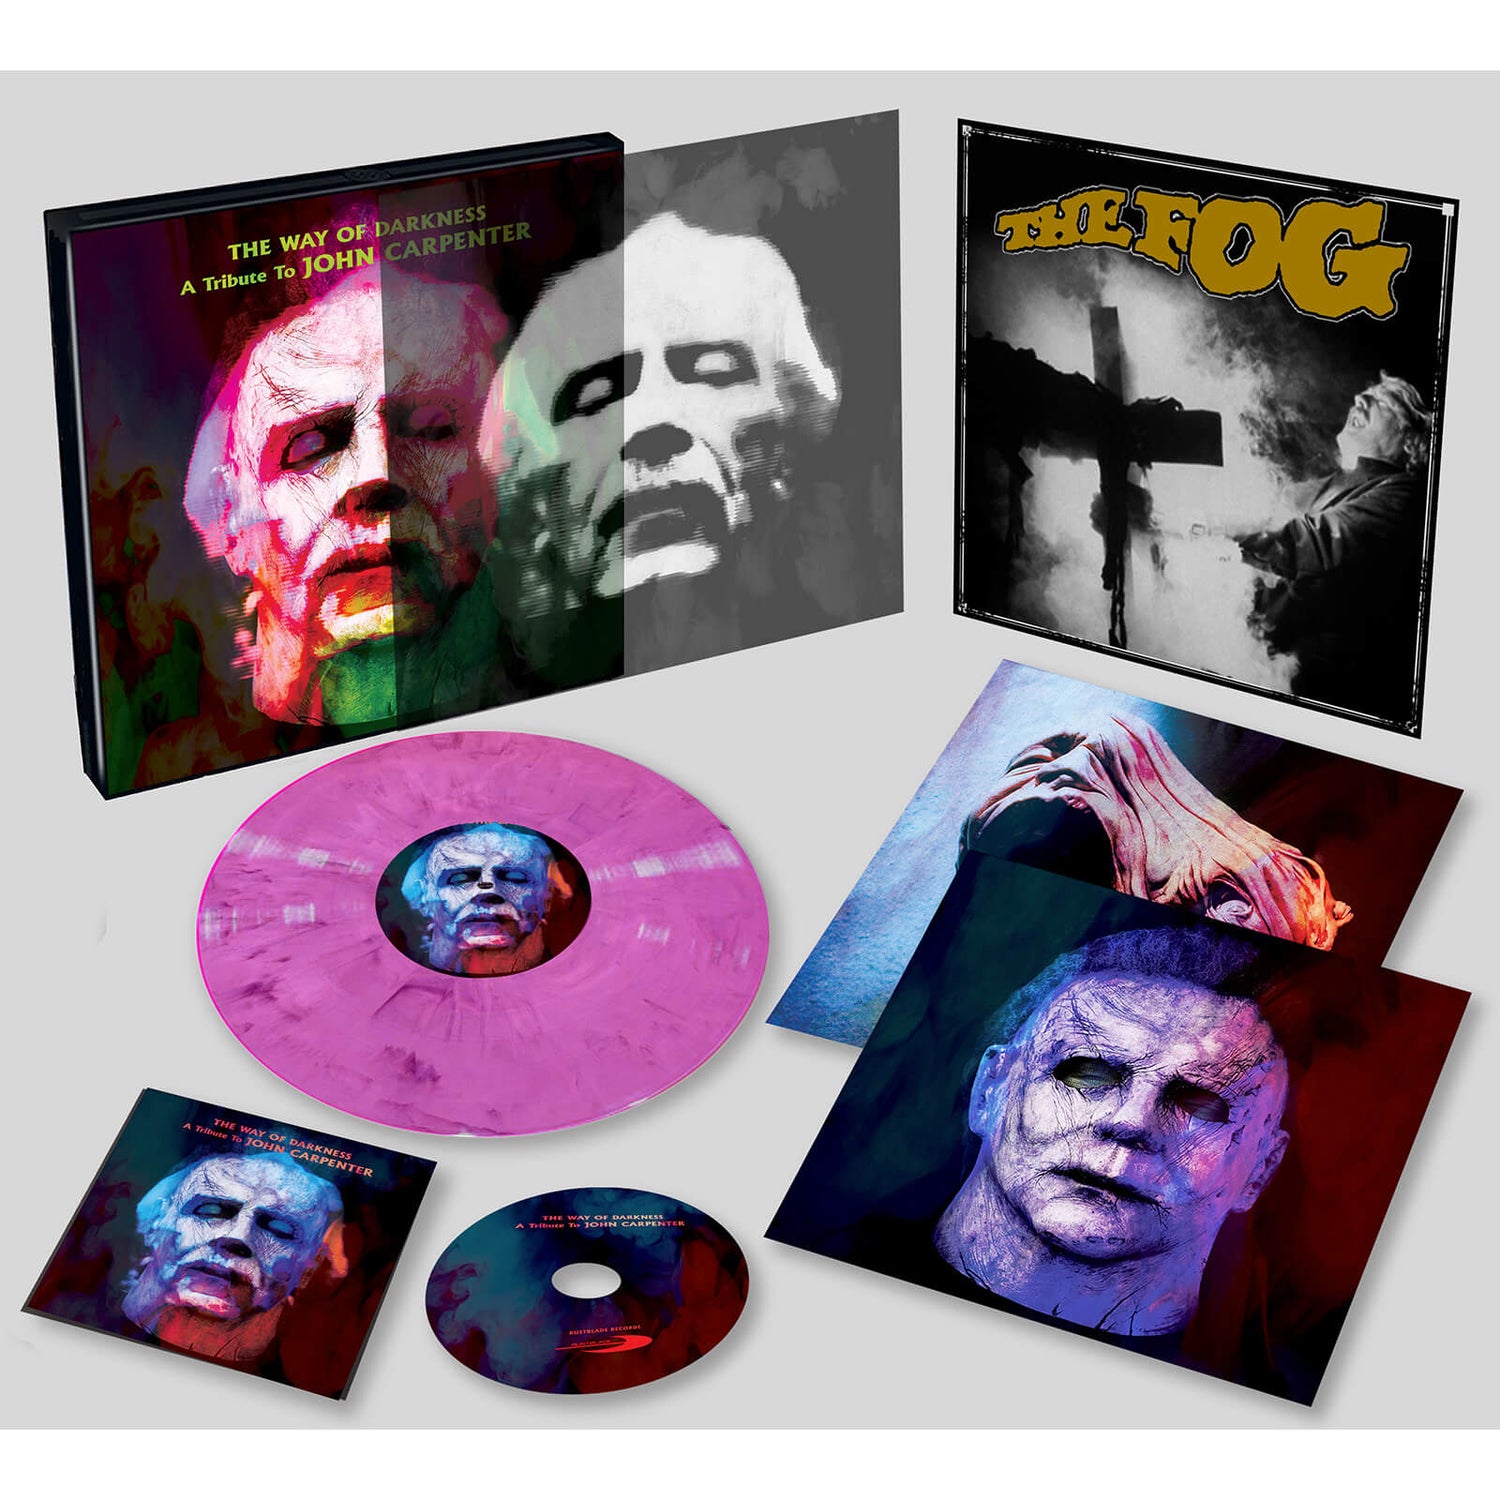 The Way Of Darkness: A Tribute To John Carpenter Deluxe Box Vinyl (Magenta)